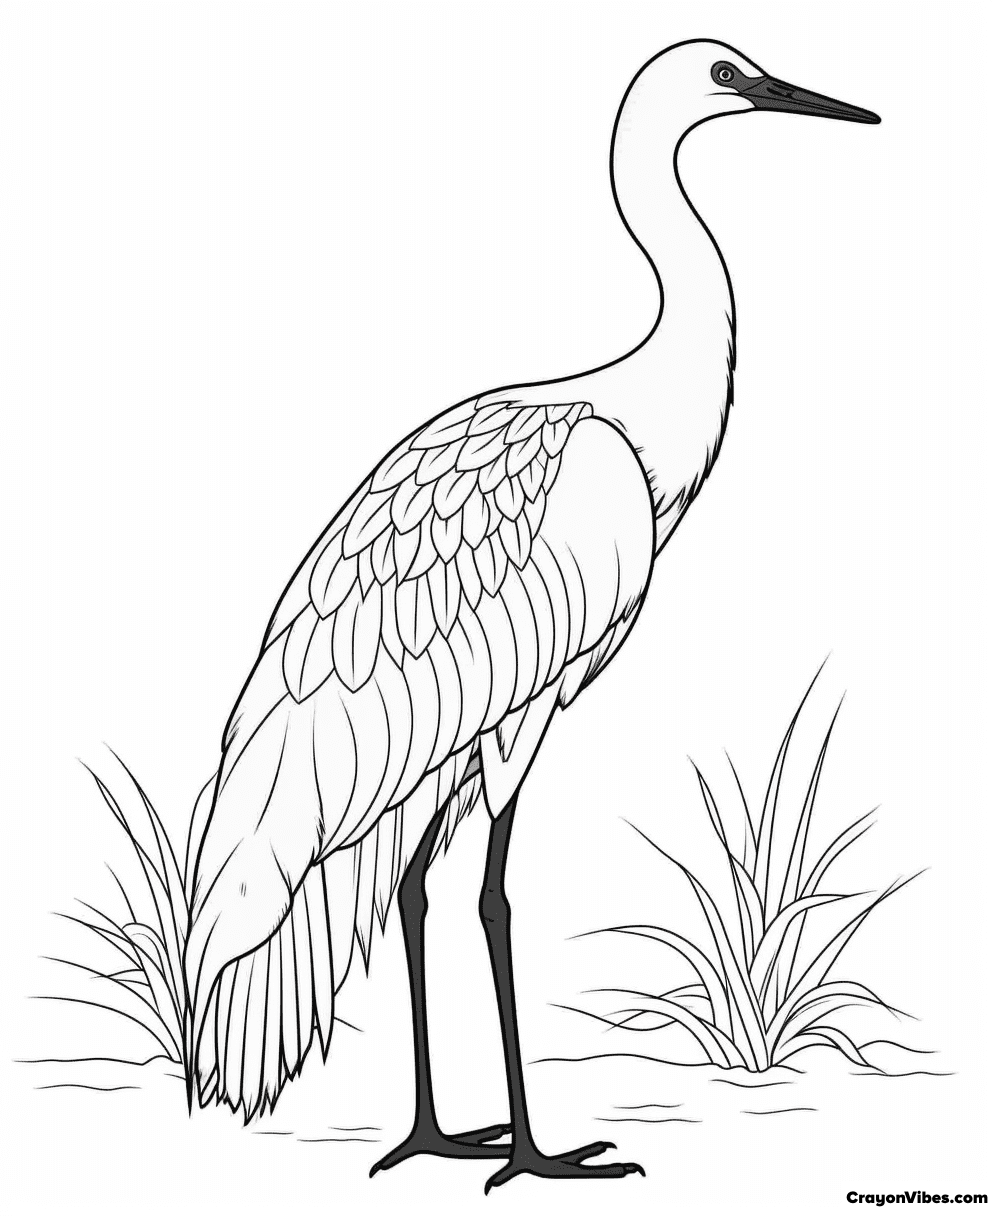 Crane Bird Coloring Pages Free Printable for Kids and Adults